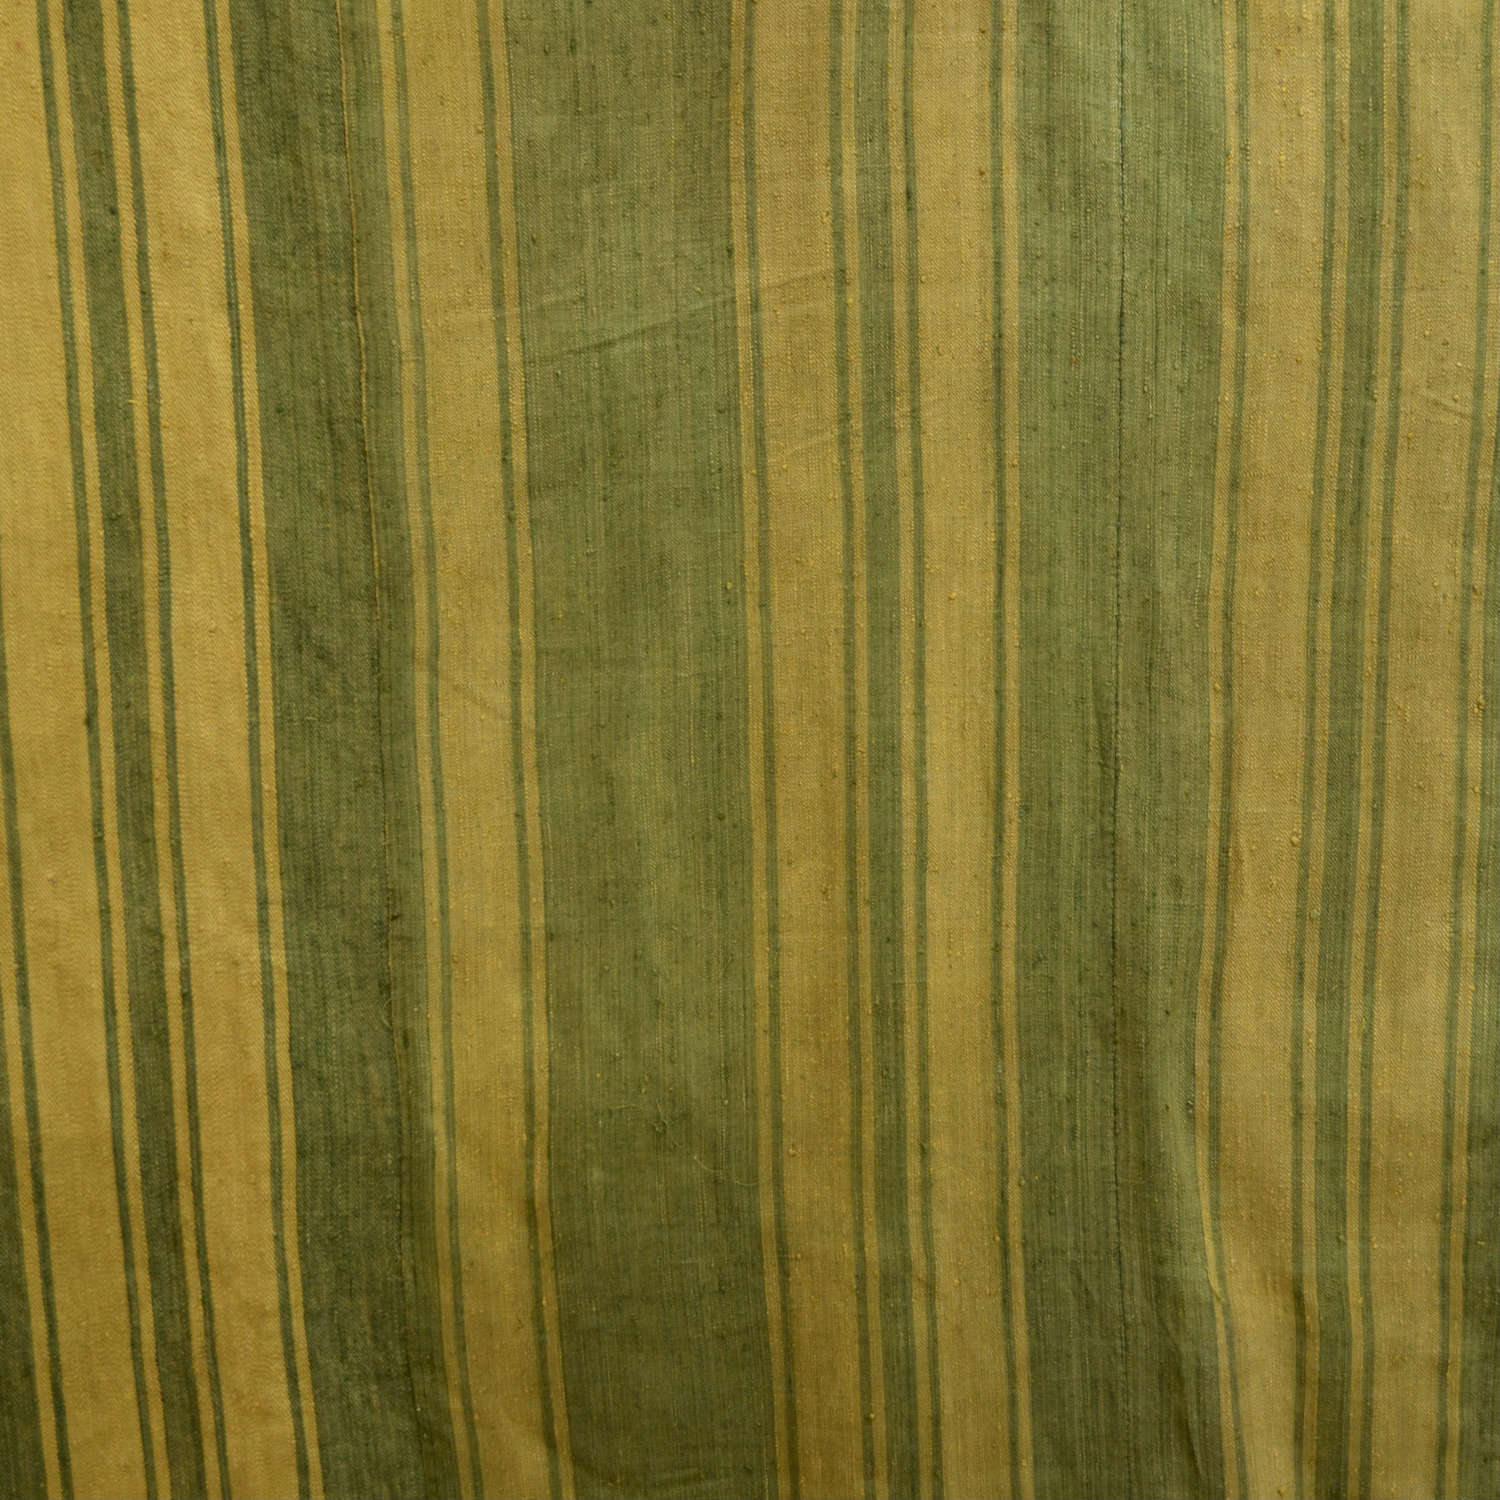 Green and Saffron Yellow Curtain French 18thC